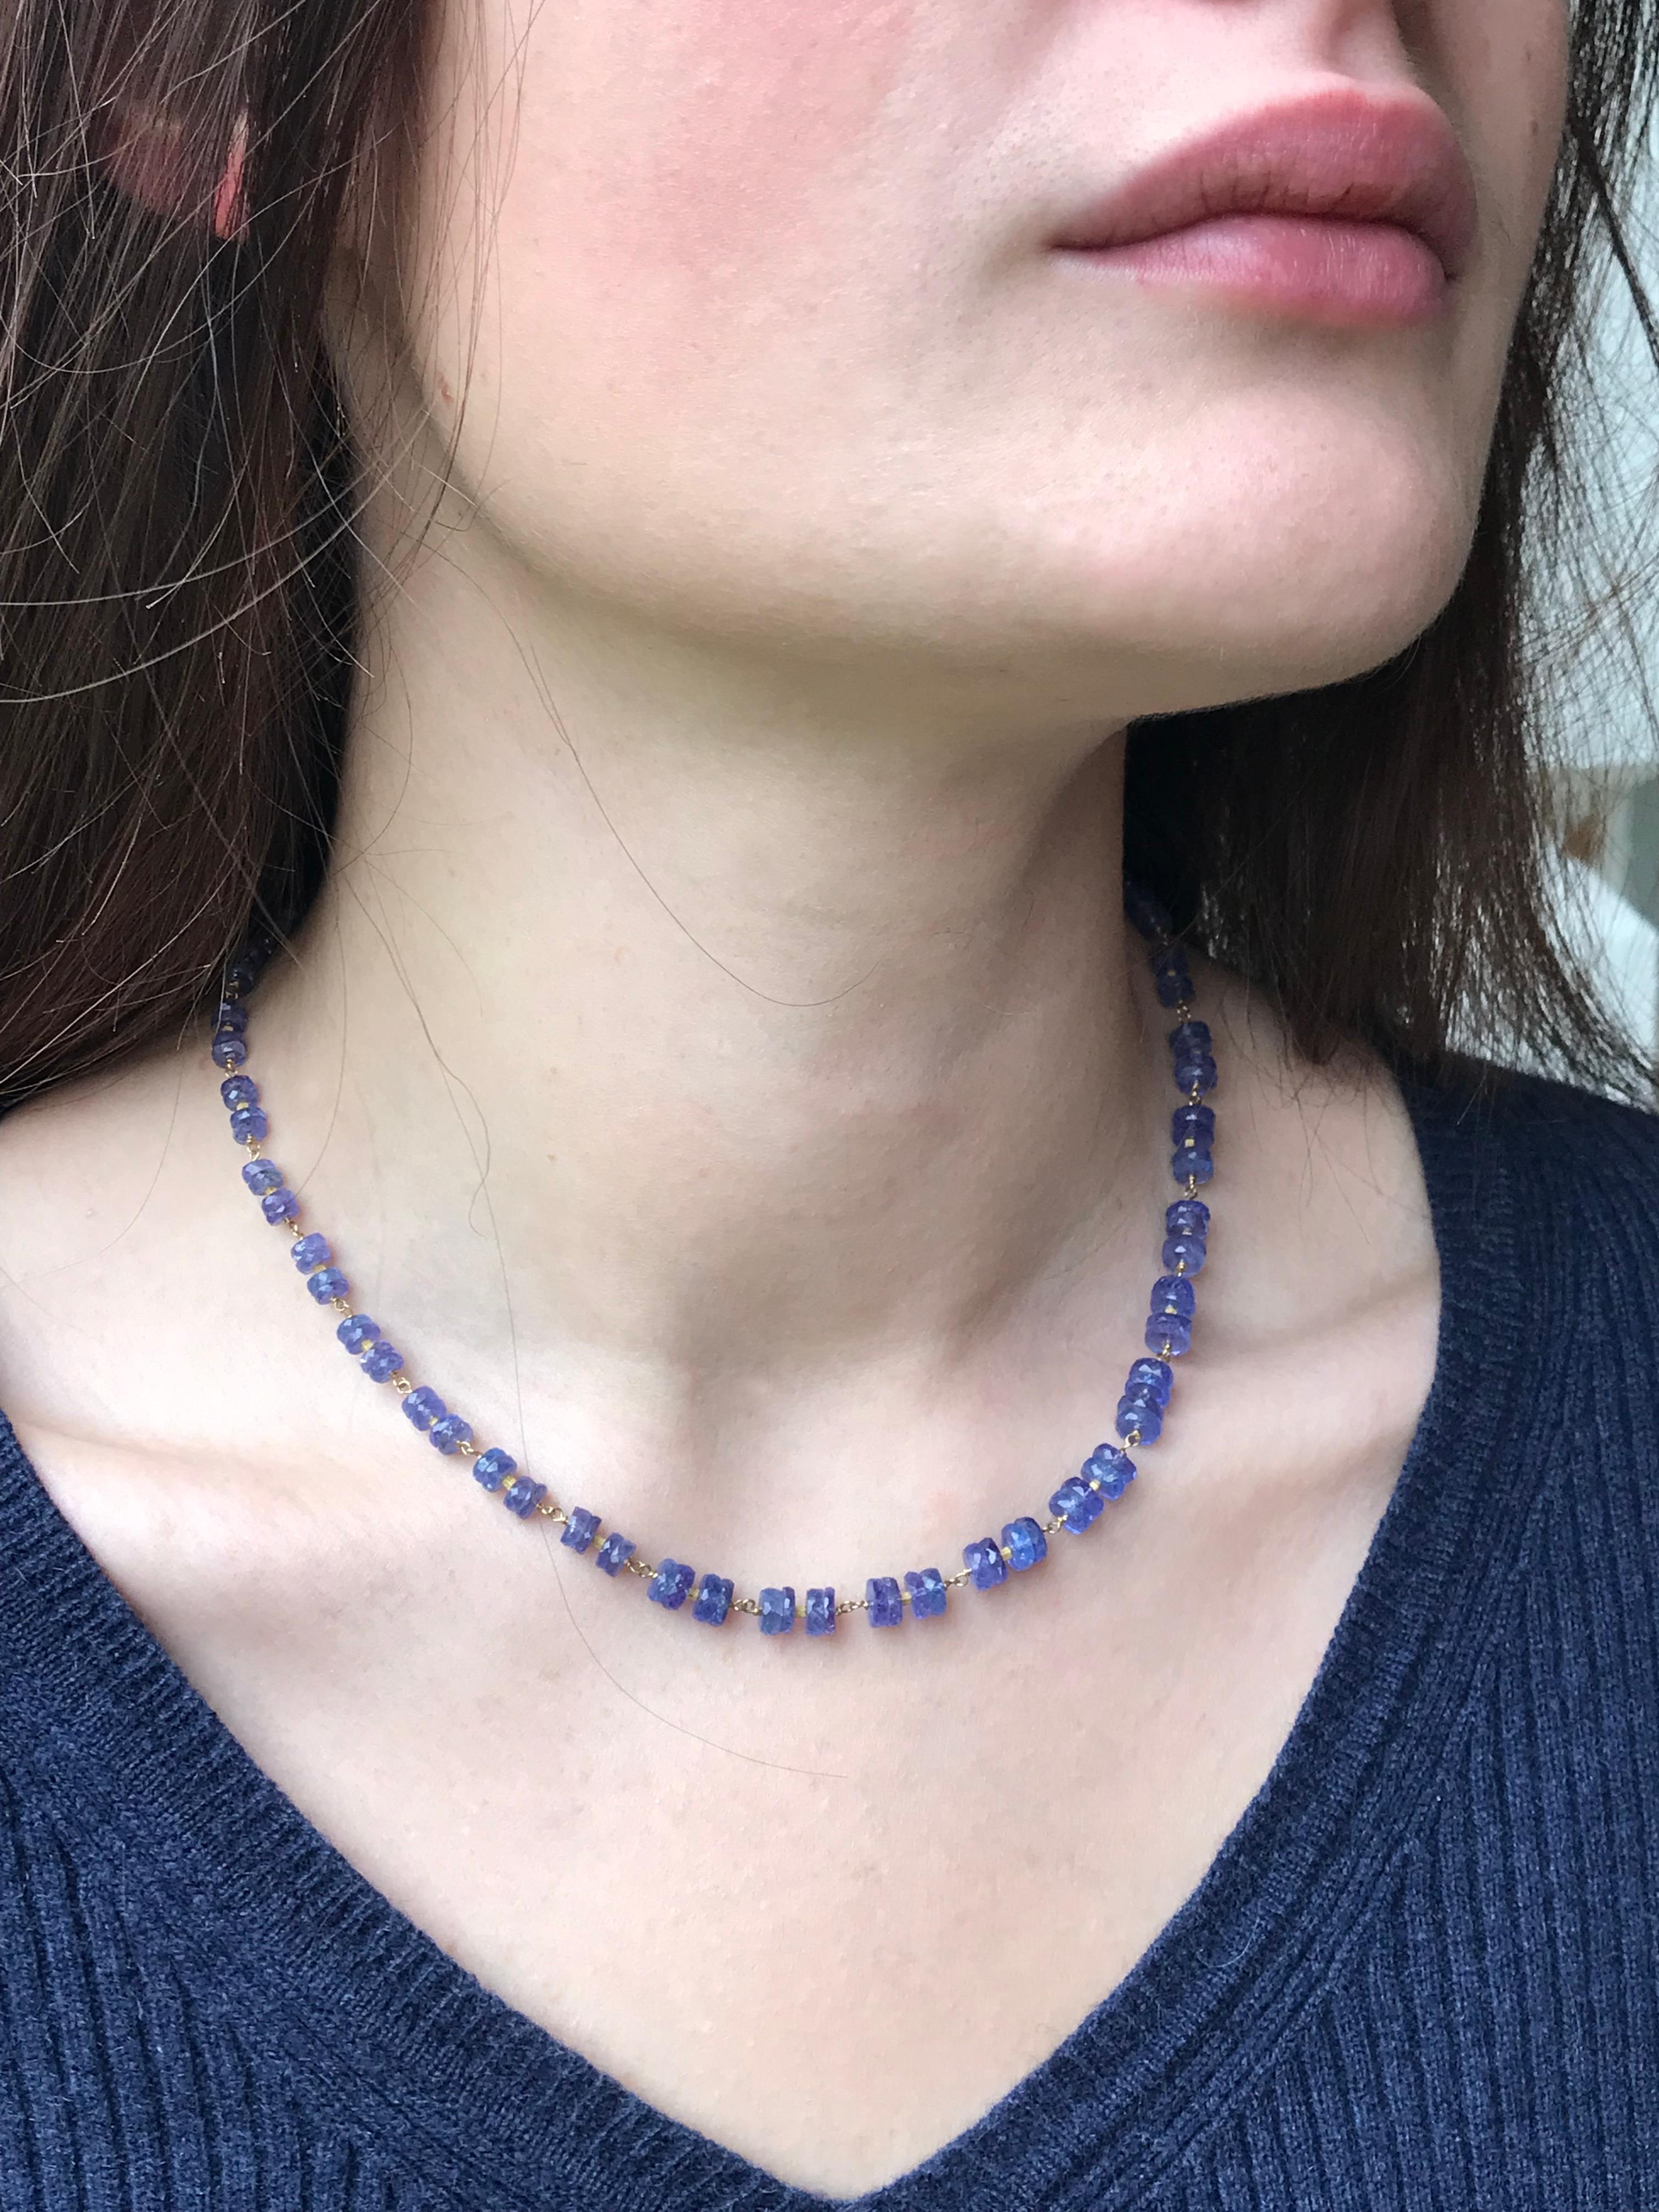 Dalben design hand crafted necklace composed of faceted tanzanite rondelle hand-linked with 18 k yellow gold. The necklace length is 17 inch (43 cm) and the yellow gold closure is satin hand engraved. 